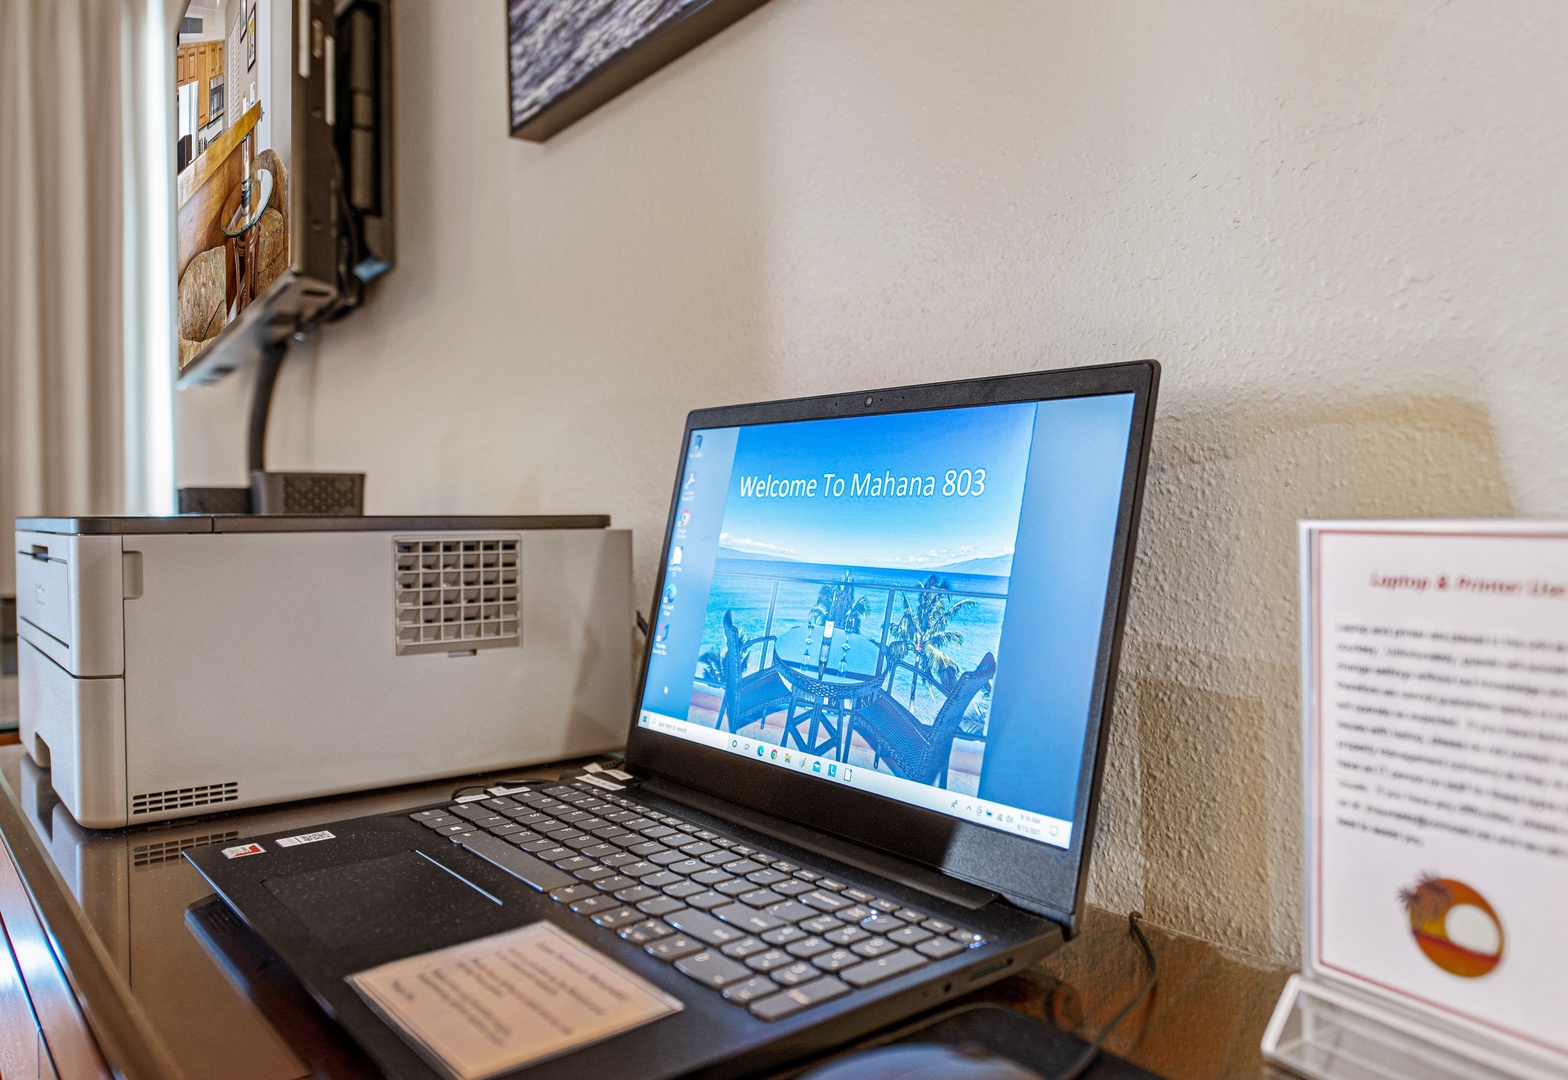 Utilize the provided laptop and printer for your convenience